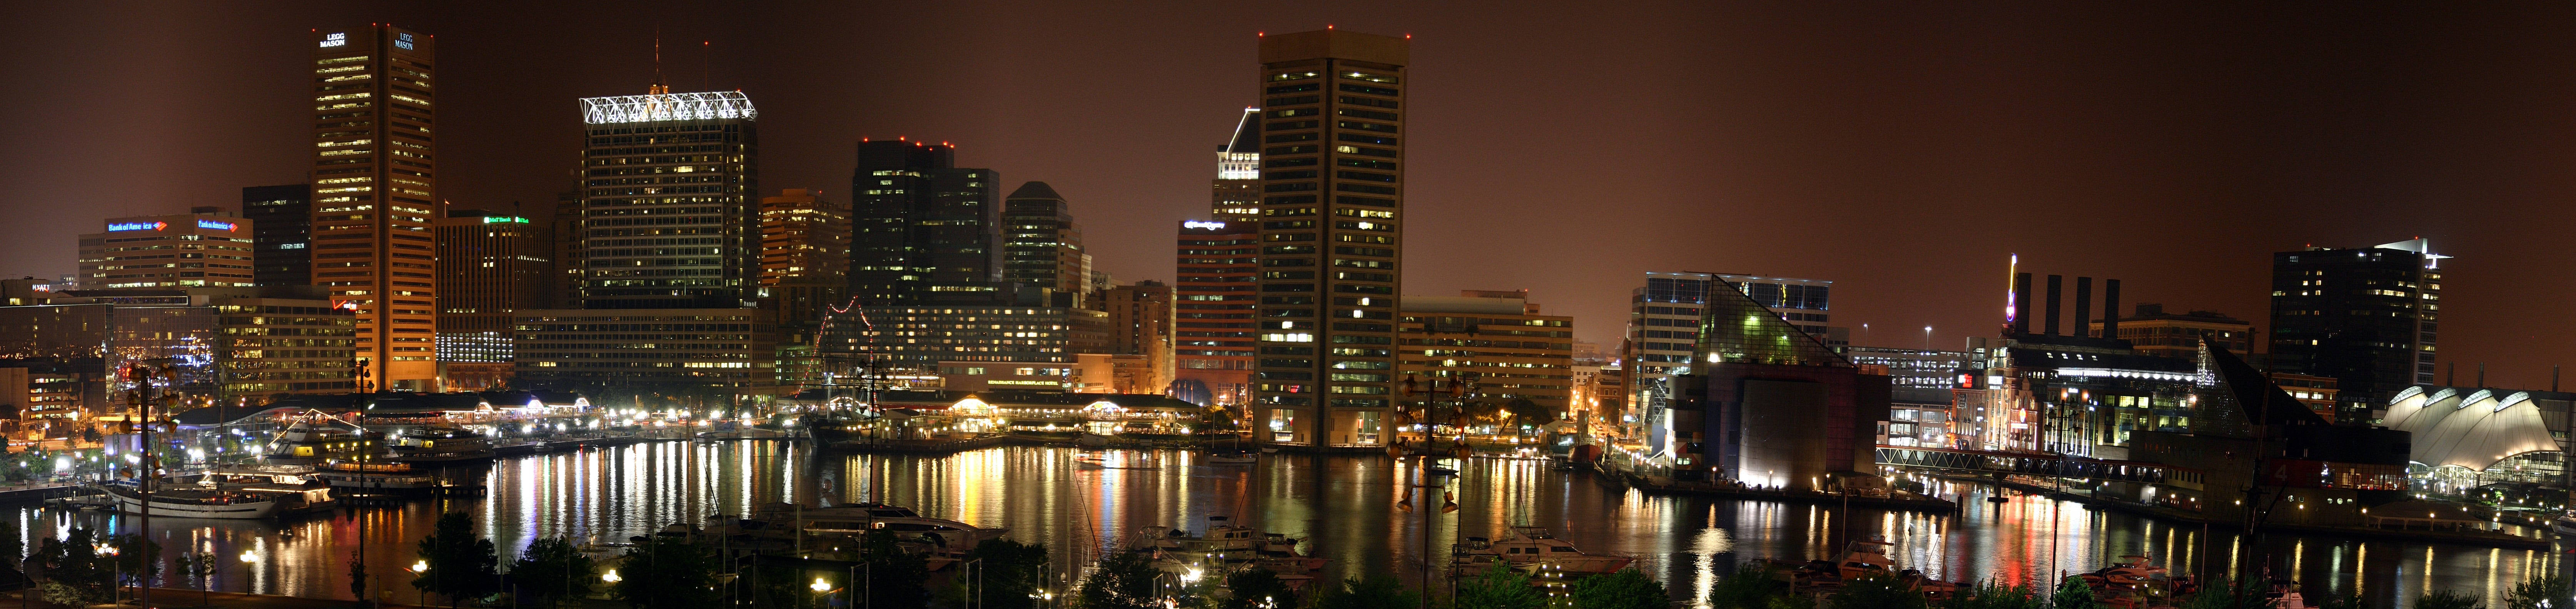 Sight To Behold In Baltimore Wallpaper